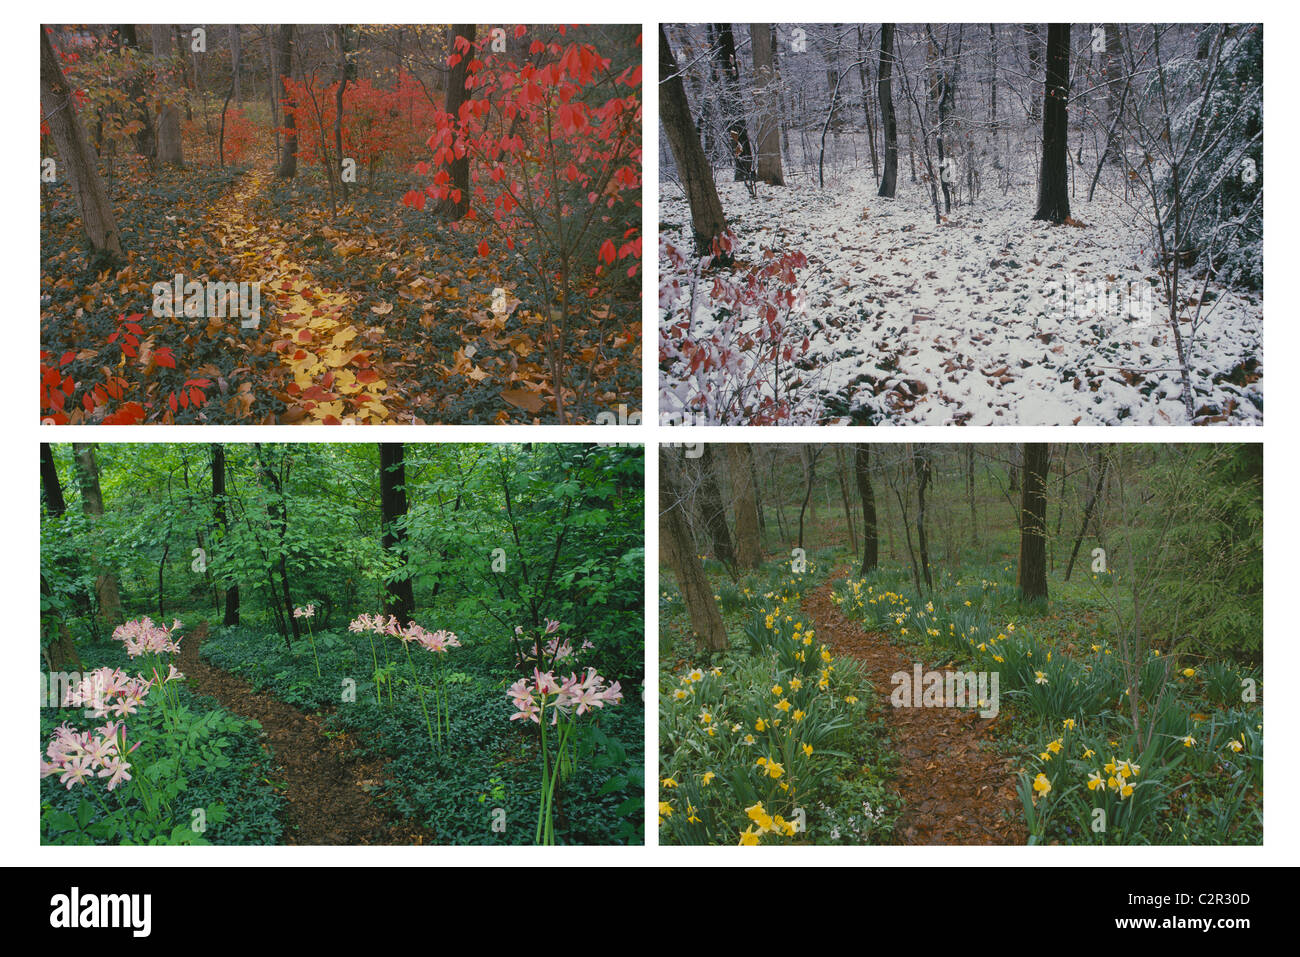 Four seasons of a wooded path in backyard - Images available individually or as composite Stock Photo